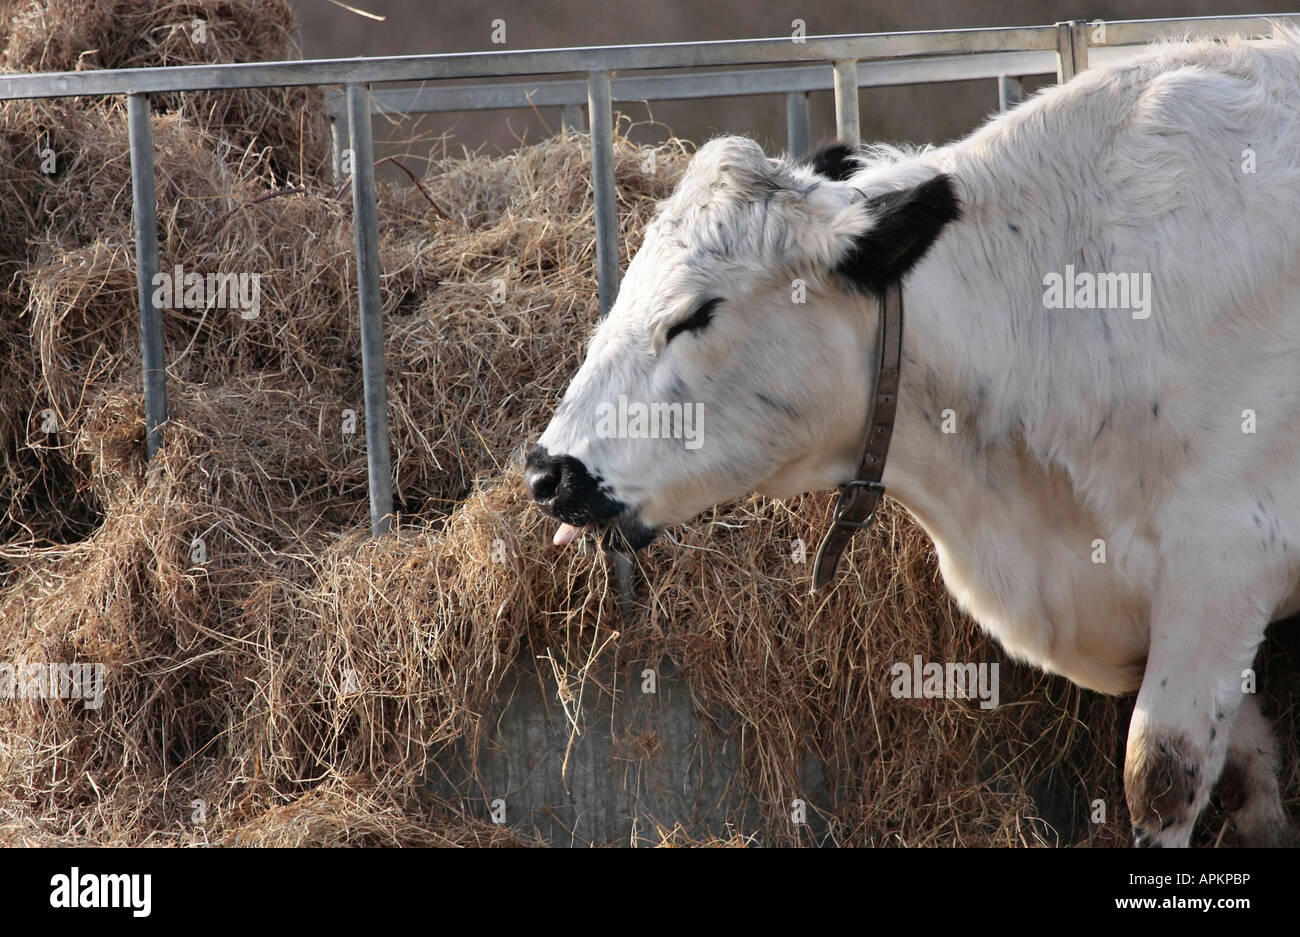 British White heifer wearing a leather collar eating hay from a large round metal feeder in field in Winter in West Sussex, England. Stock Photo